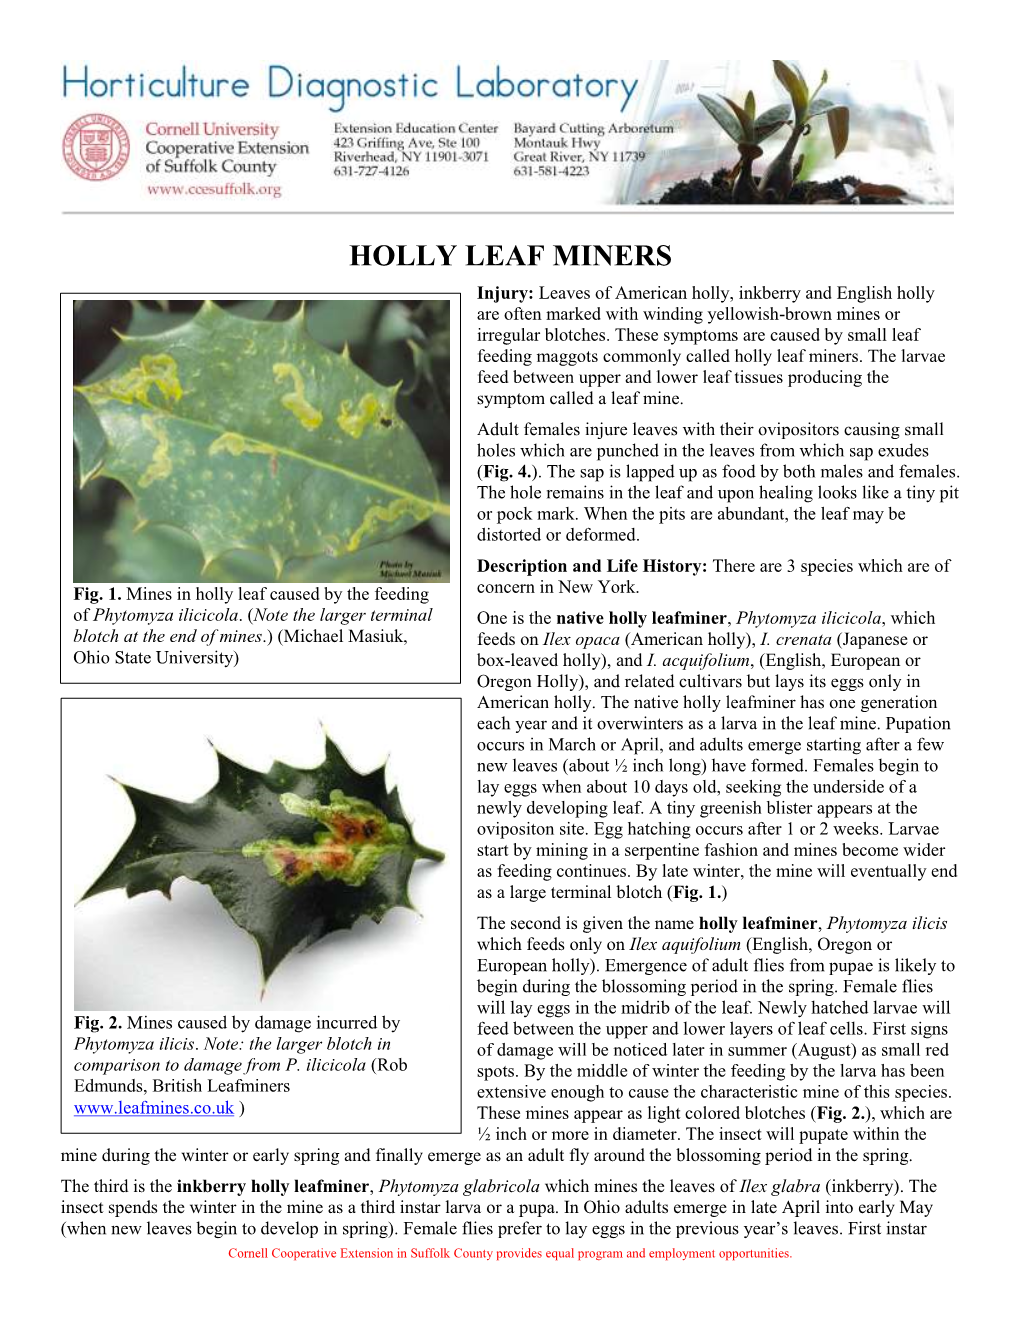 HOLLY LEAF MINERS Injury: Leaves of American Holly, Inkberry and English Holly Are Often Marked with Winding Yellowish-Brown Mines Or Irregular Blotches